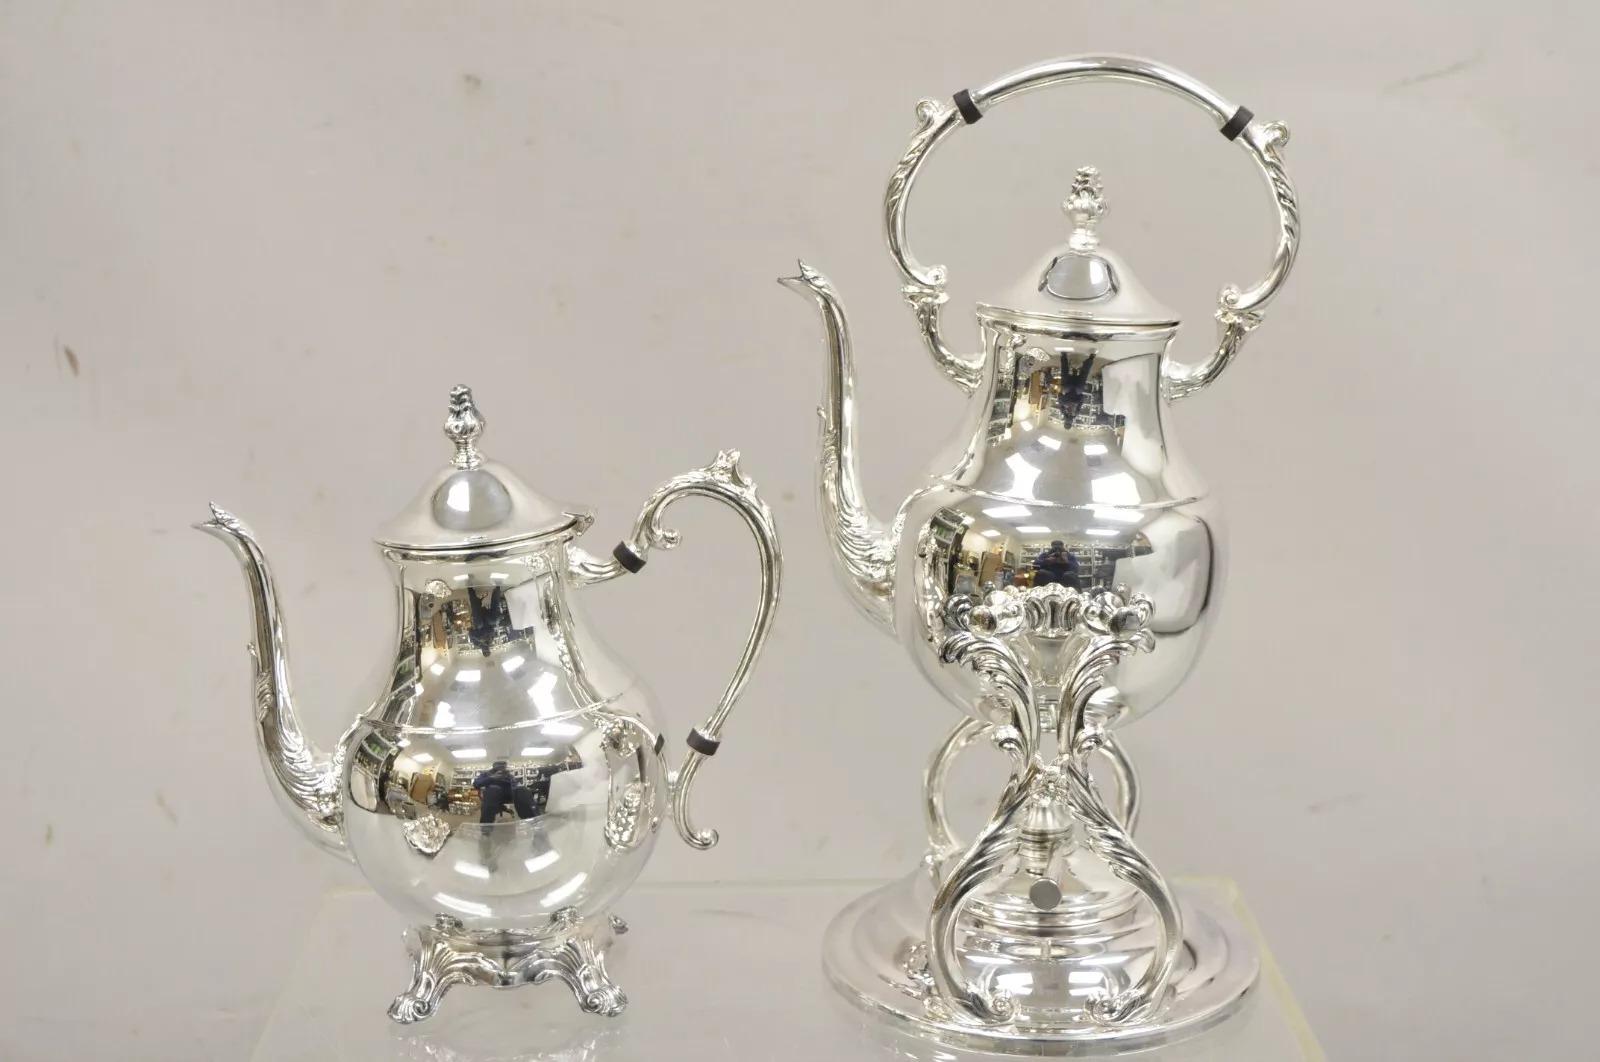 Vintage FB Rogers Victorian Silver Plated Tea Set with Tilting Pot - 6 Pc Set For Sale 4